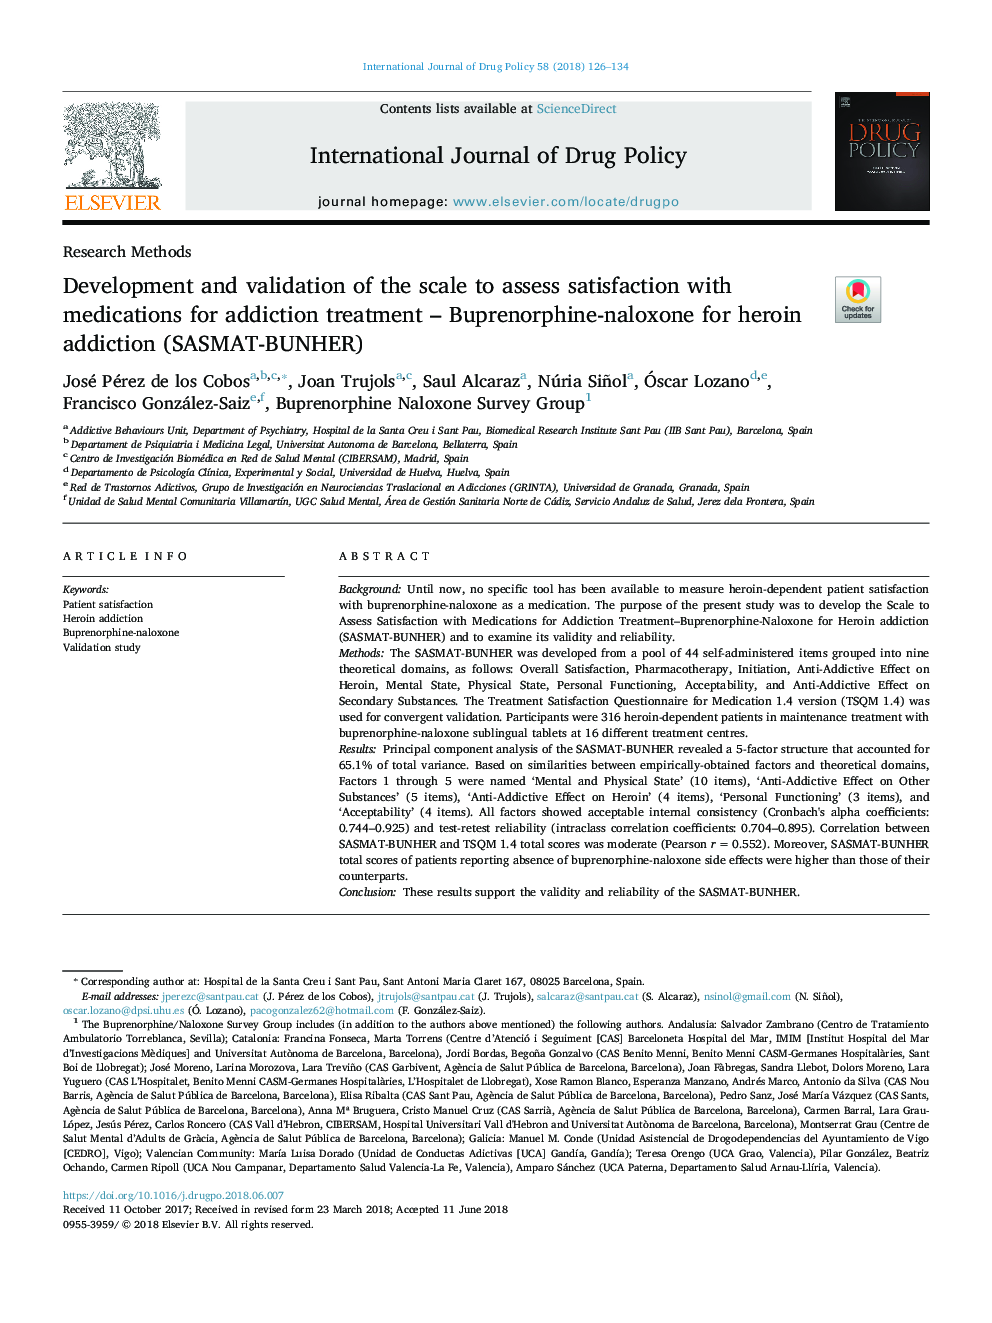 Development and validation of the scale to assess satisfaction with medications for addiction treatment - Buprenorphine-naloxone for heroin addiction (SASMAT-BUNHER)